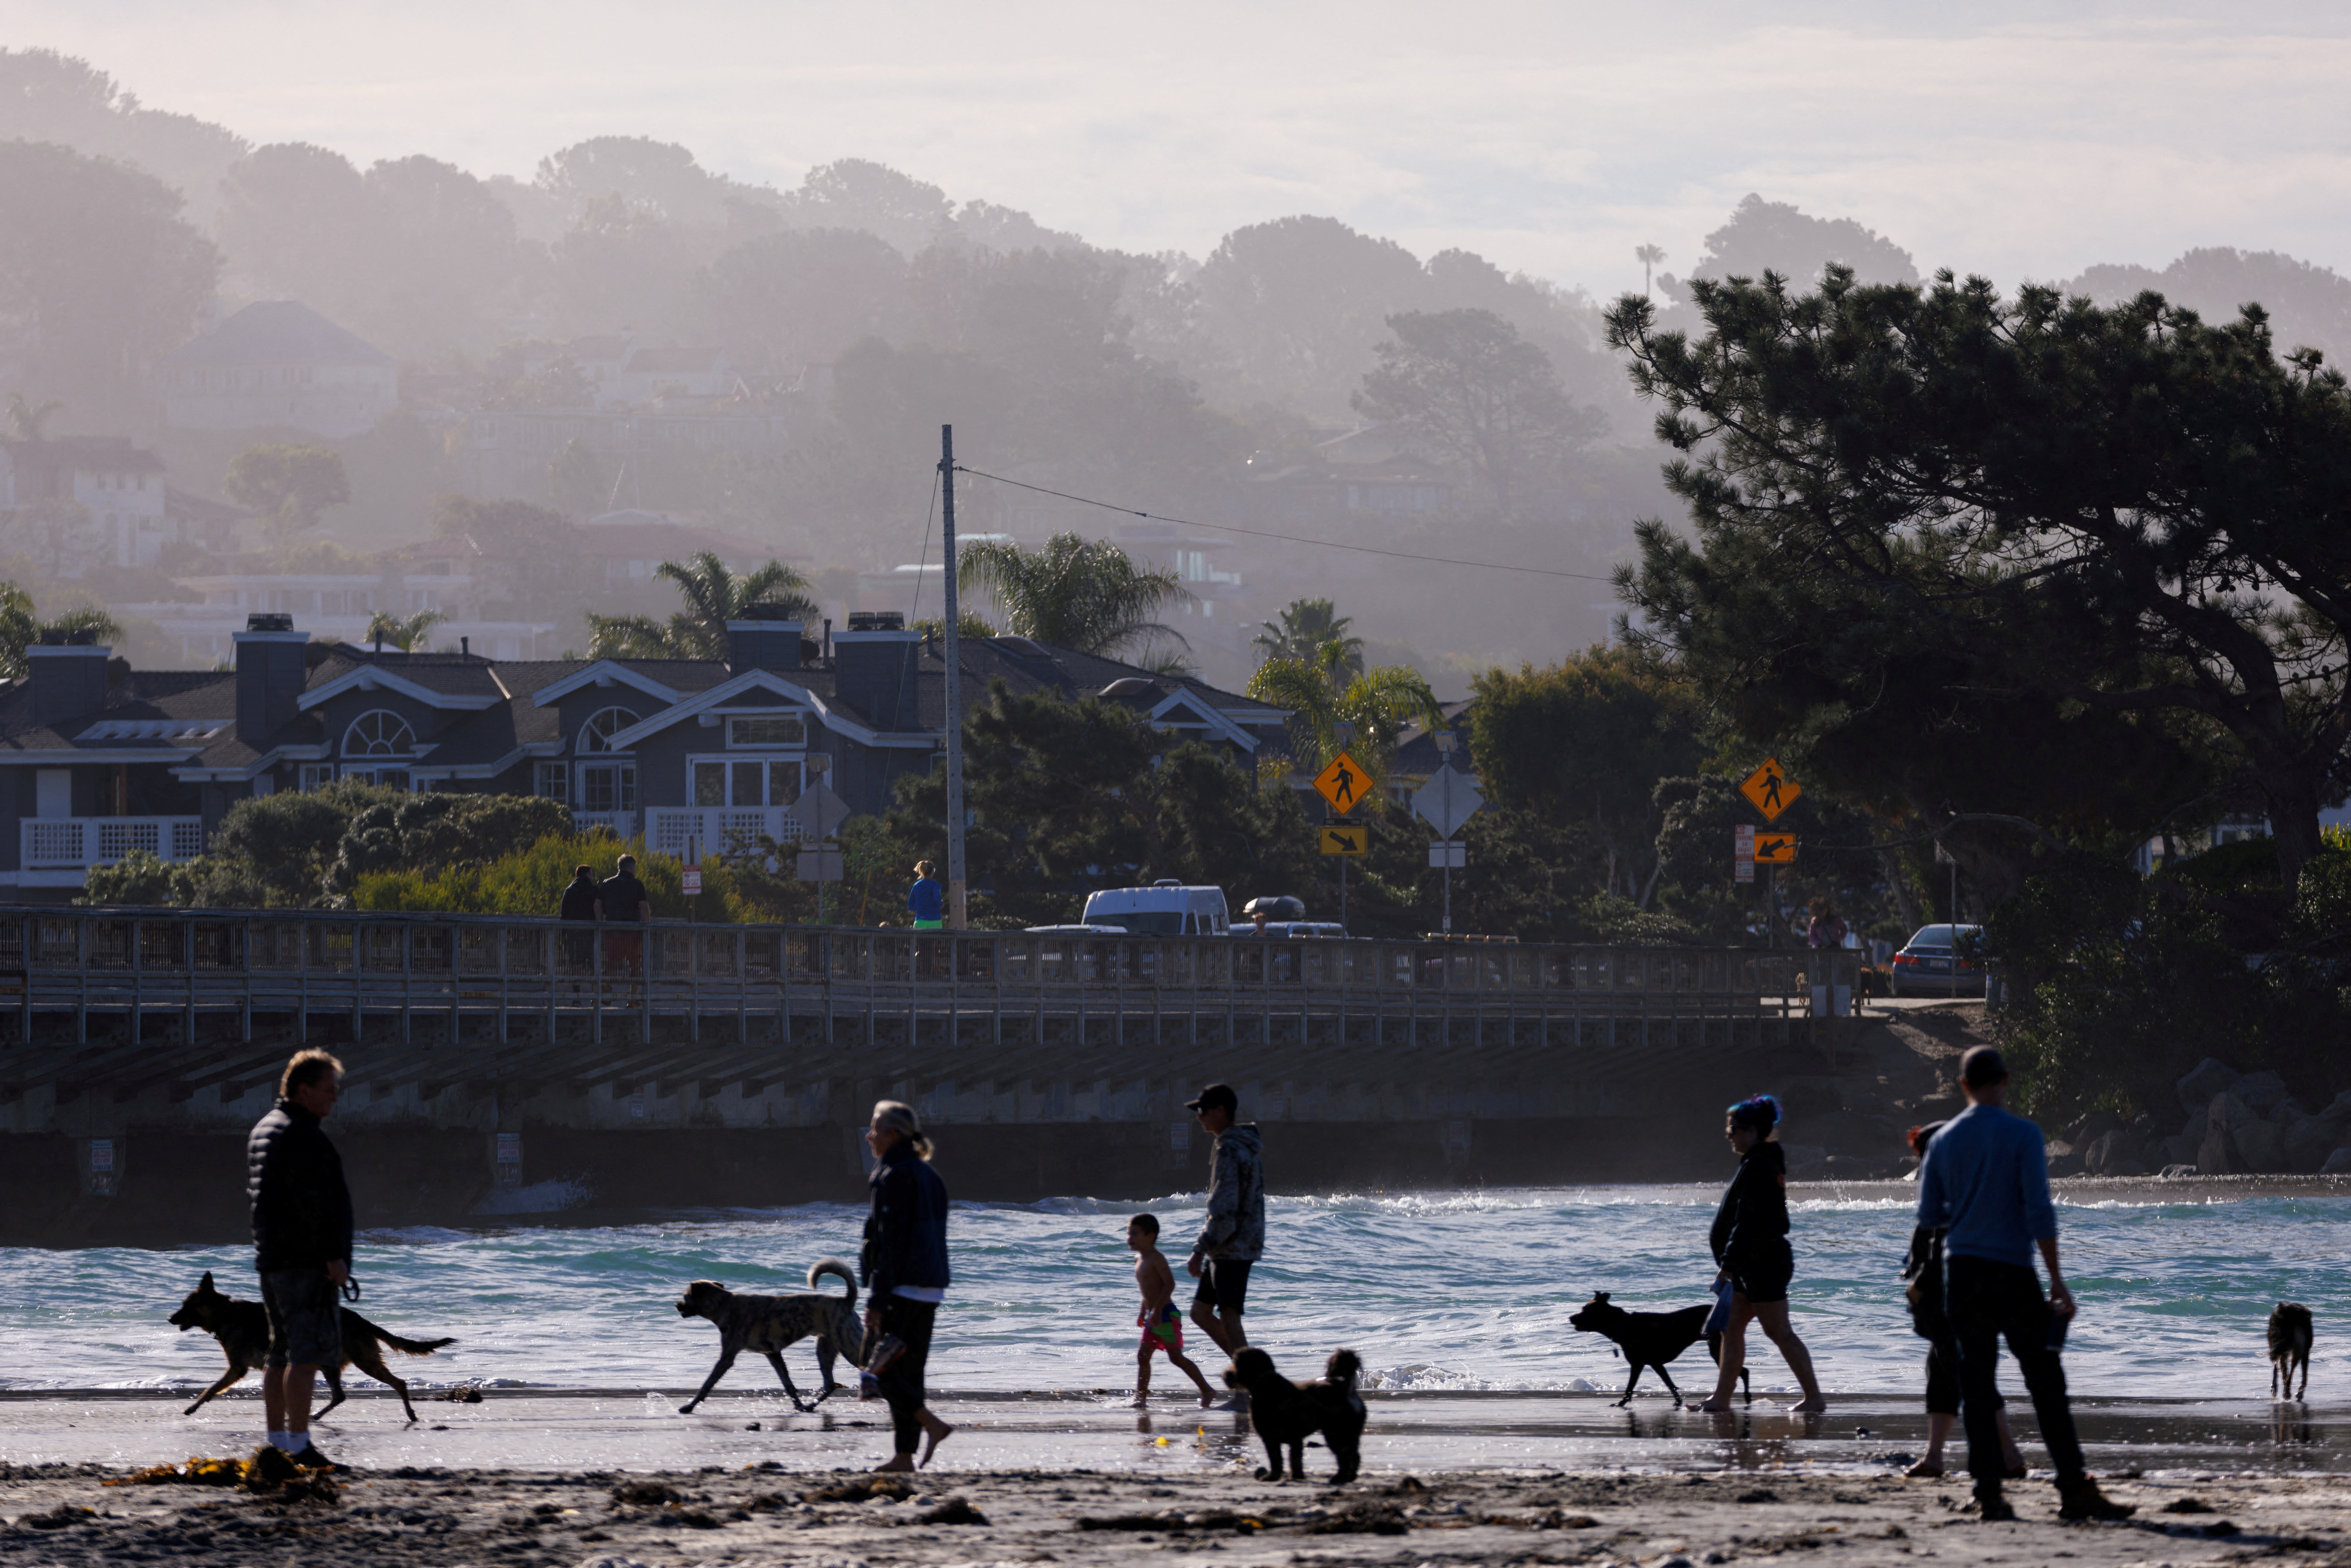 Dog owners and their animals at the beach in California